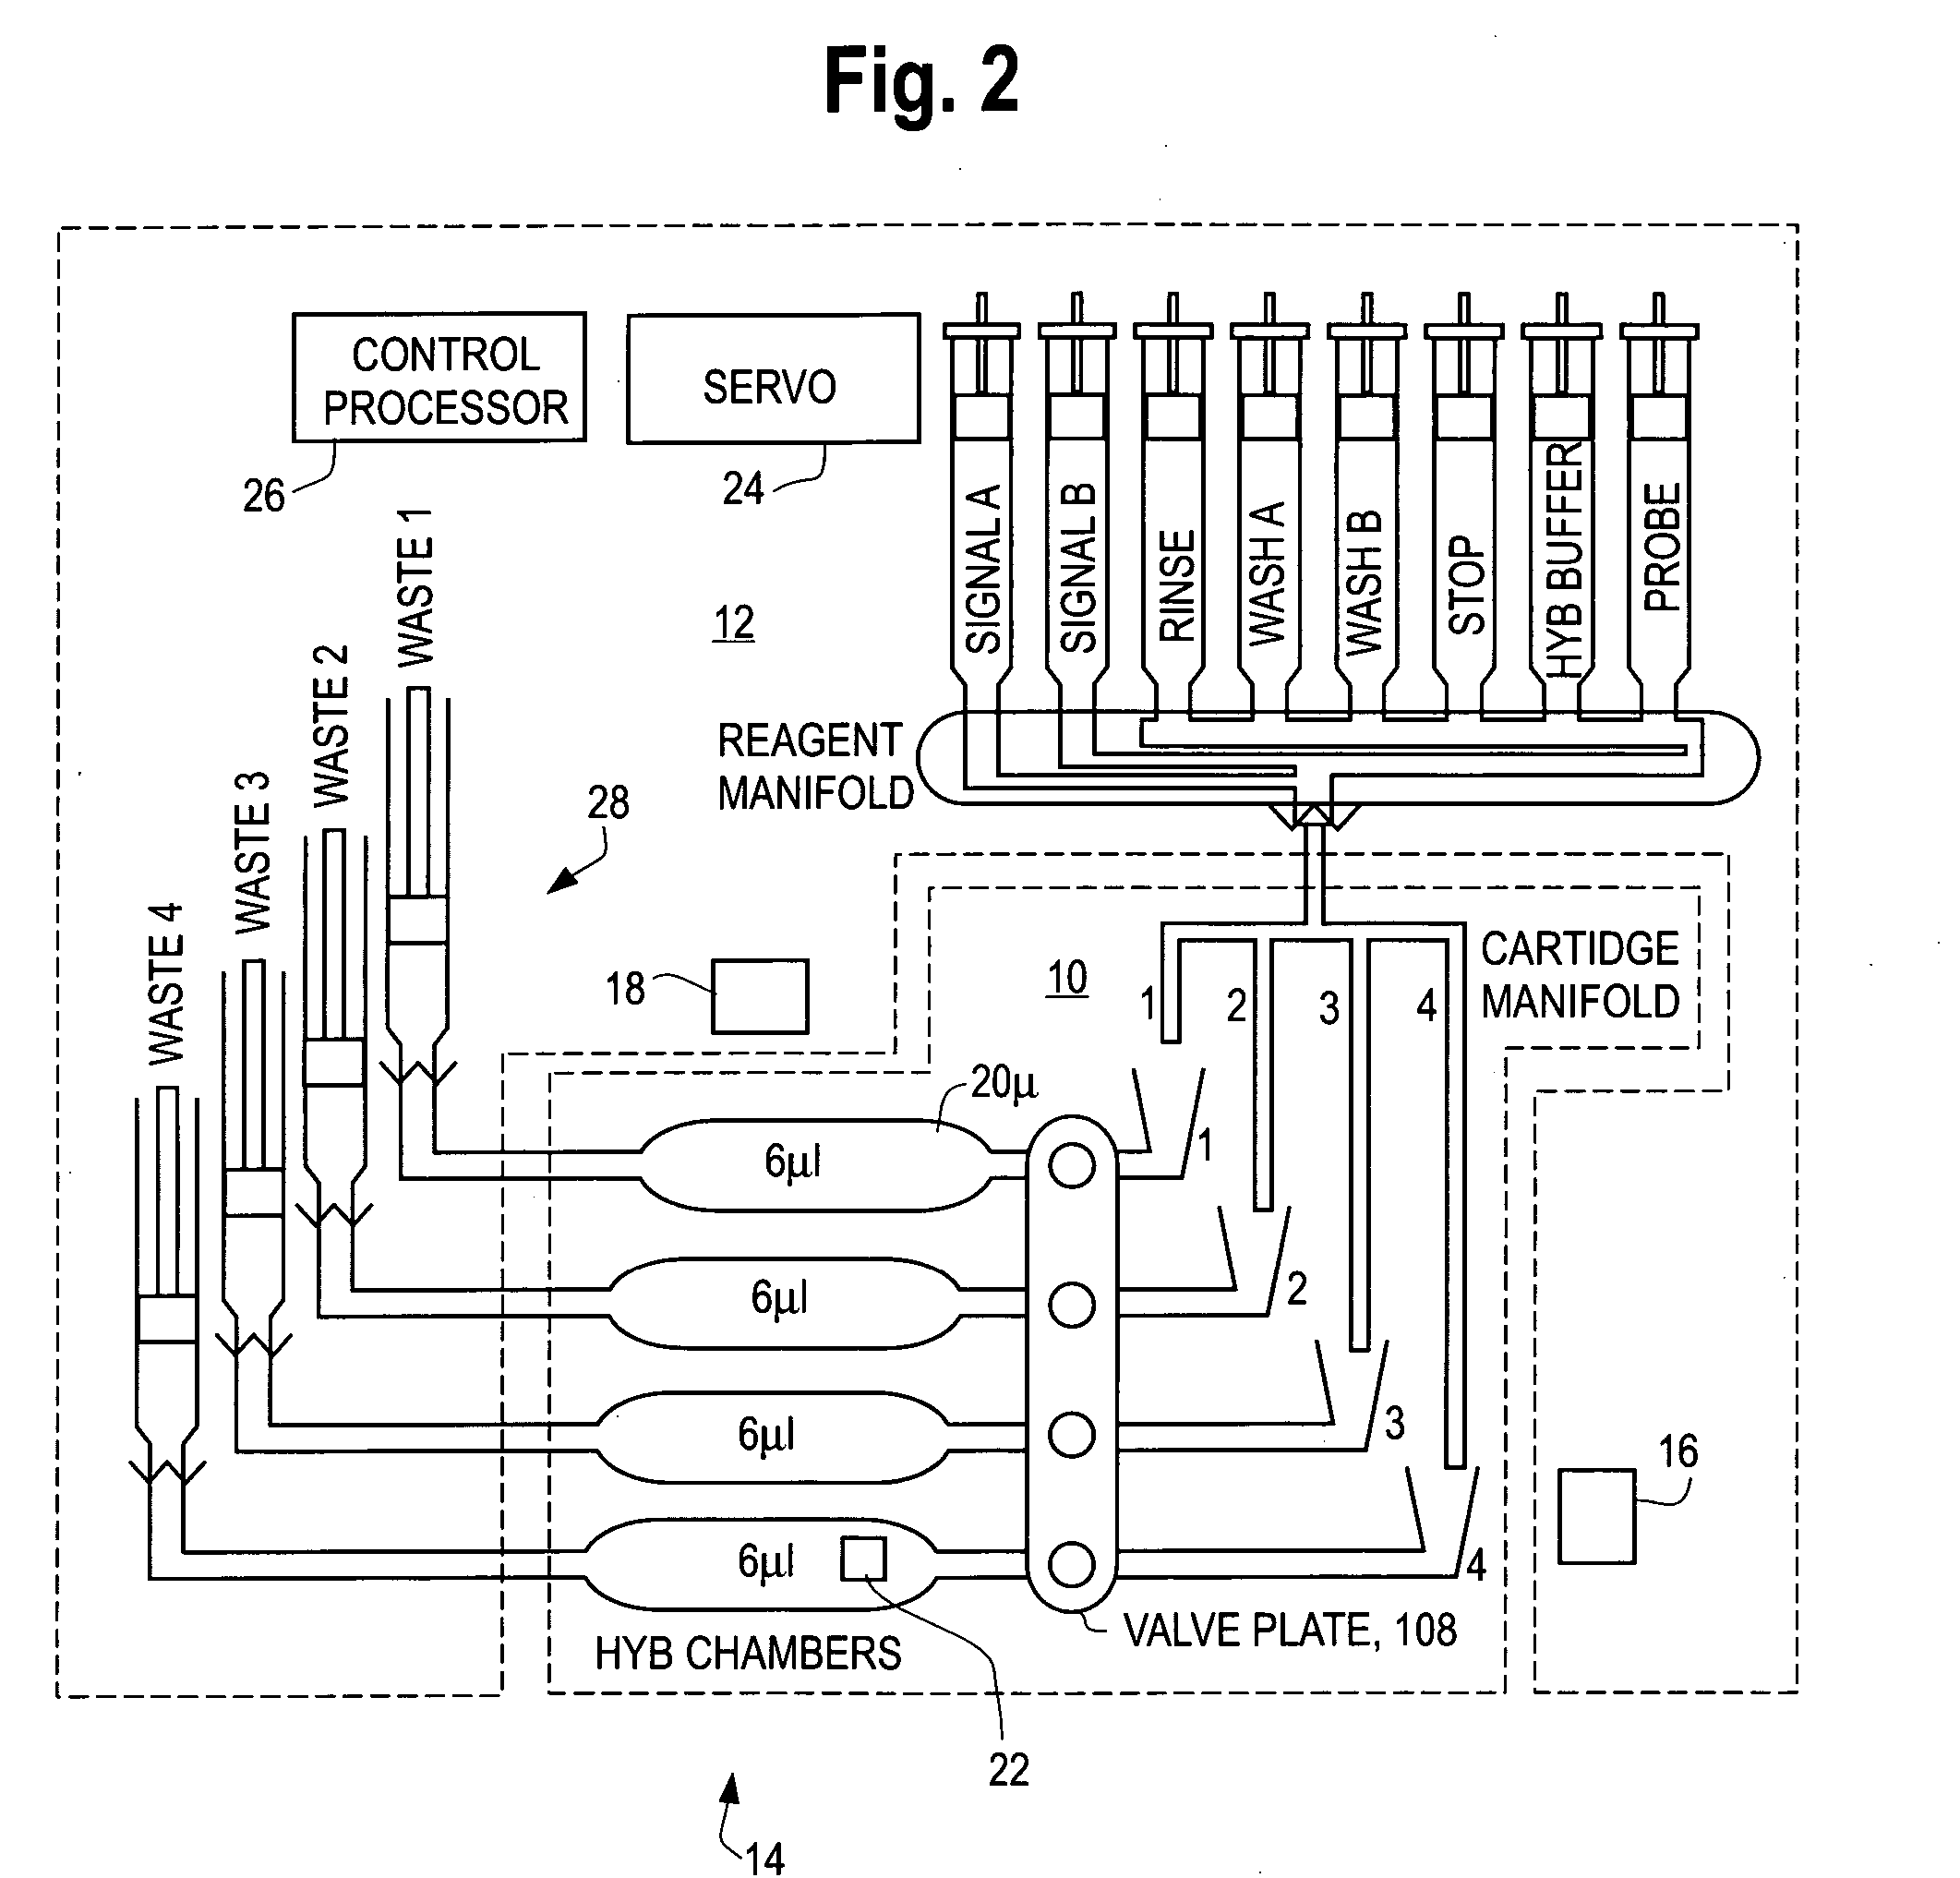 Disposable sample processing module for detecting nucleic acids